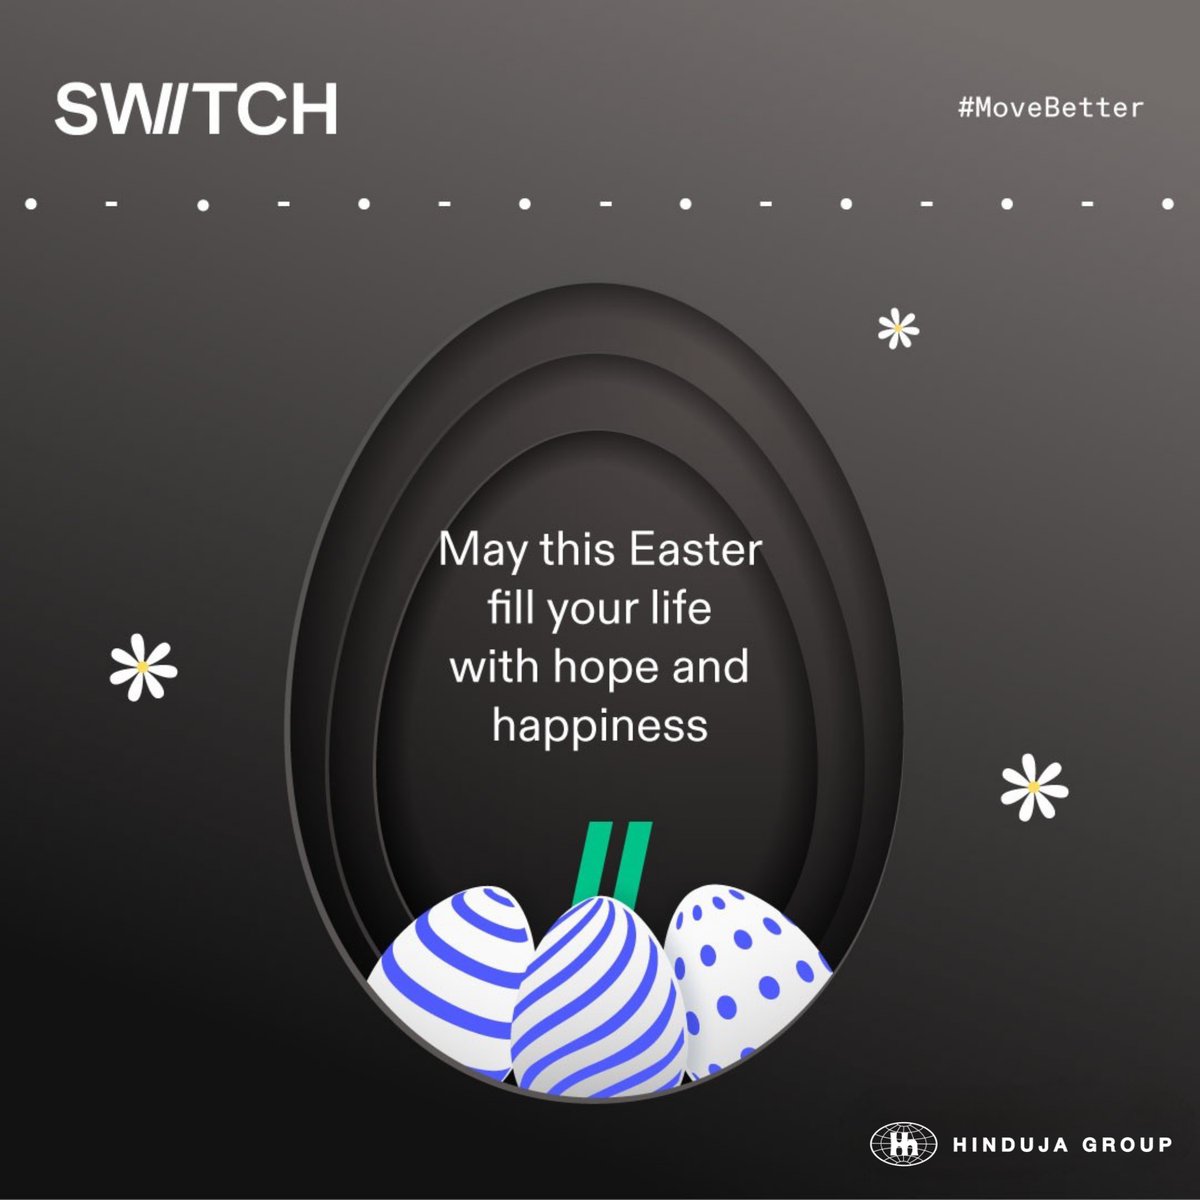 Wishing you a day filled with joy, love, and delightful moments with your loved ones. Let's embrace the spirit of renewal and hope as we embark on this journey of new beginnings. May your day be as bright and colorful as the Easter eggs we hunt for! #SwitchMobility #MoveBetter…